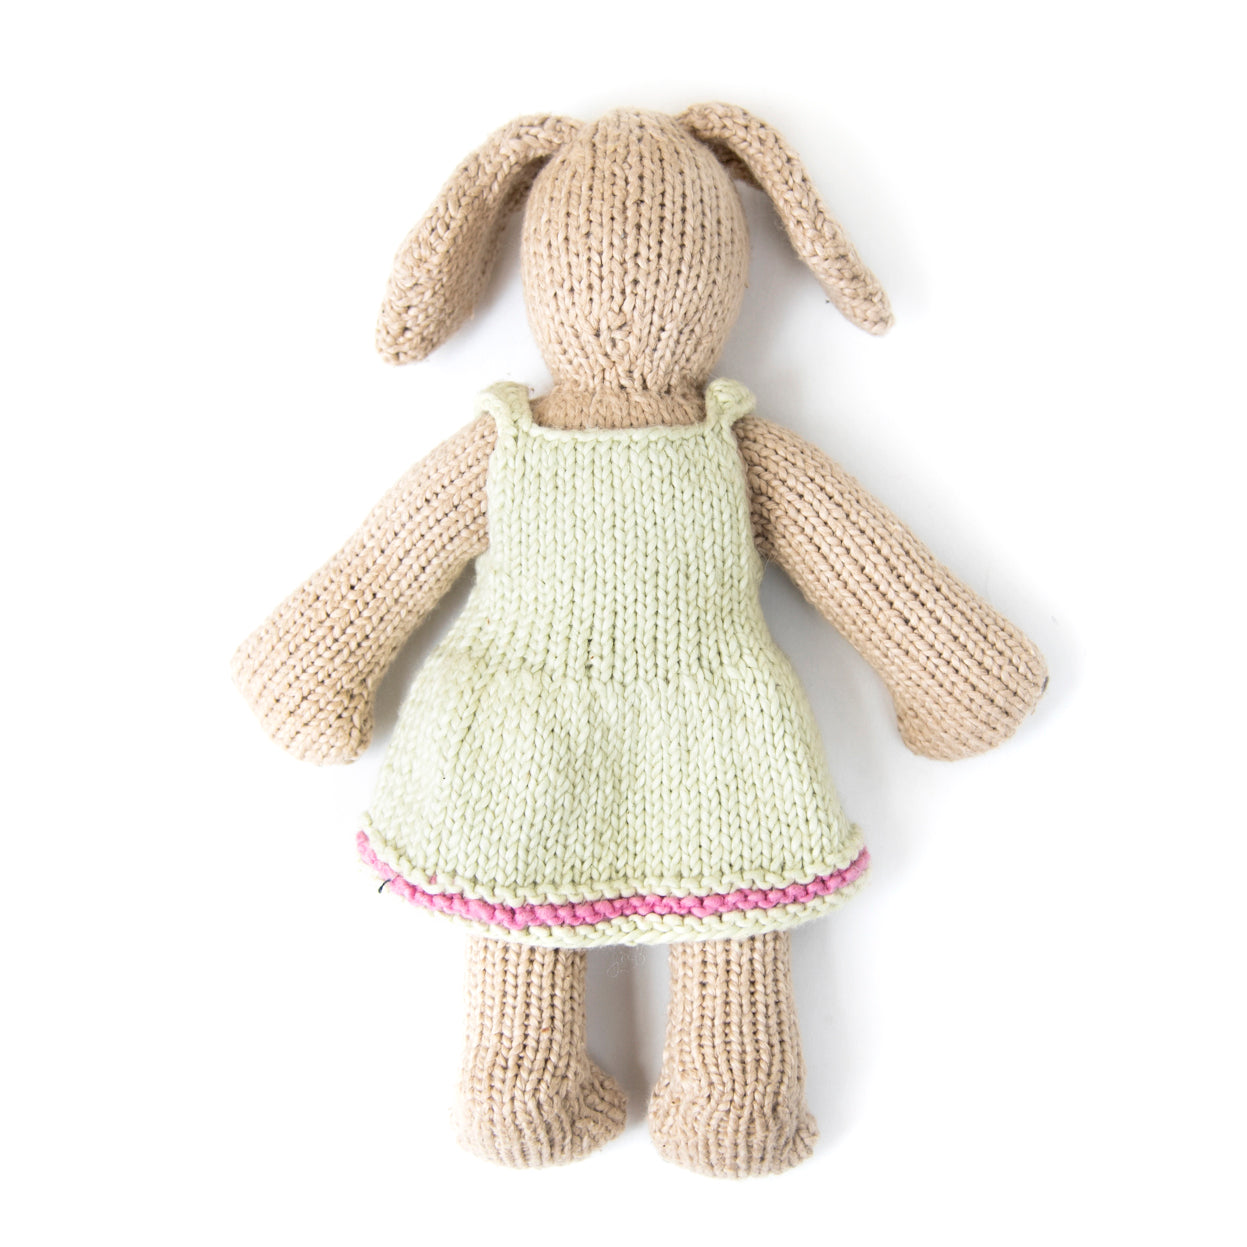 Beige Bunny Knitted Doll Green Dress- Paige